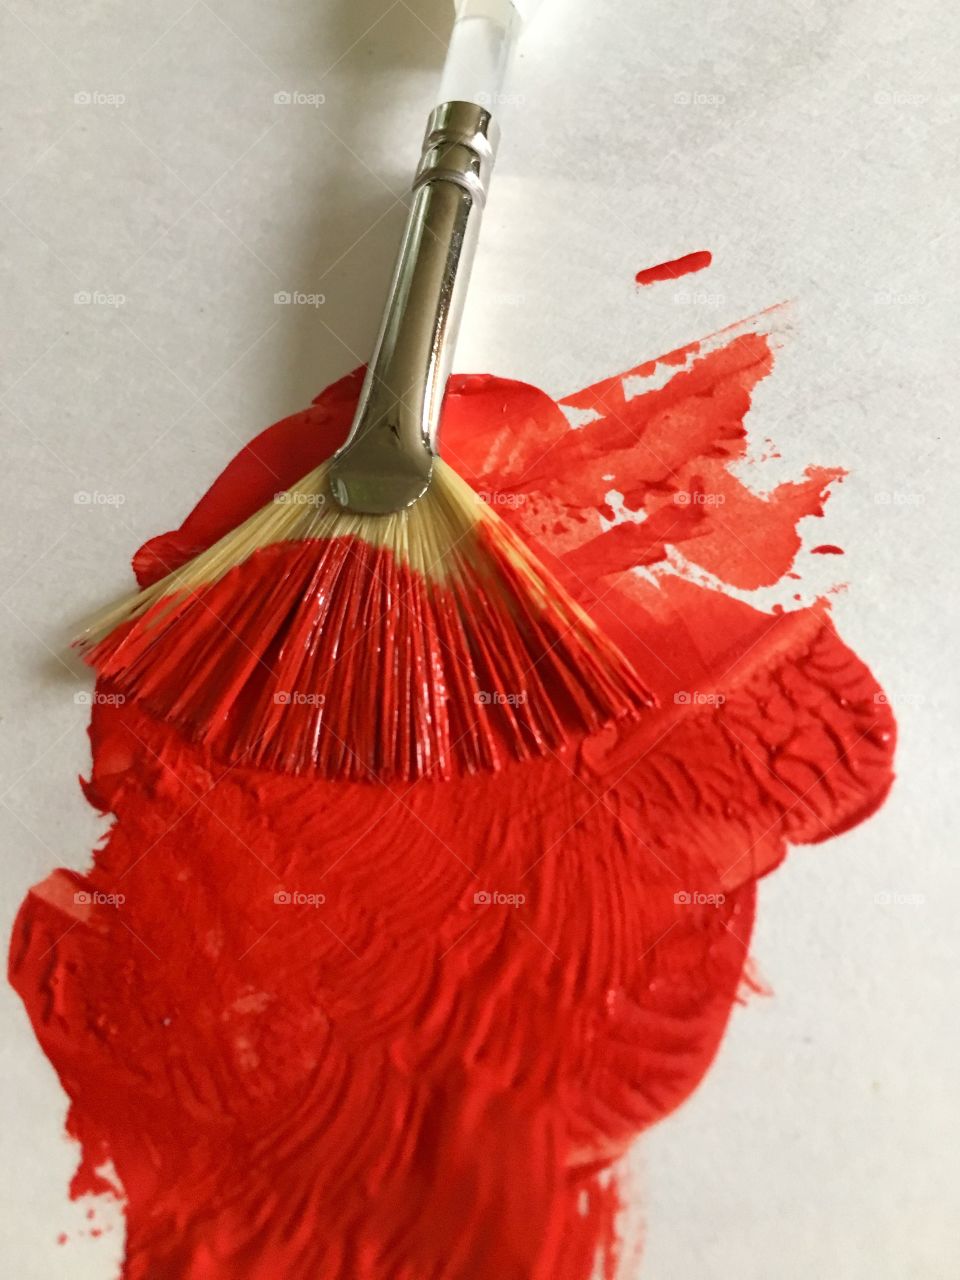 Close-up of a paintbrush